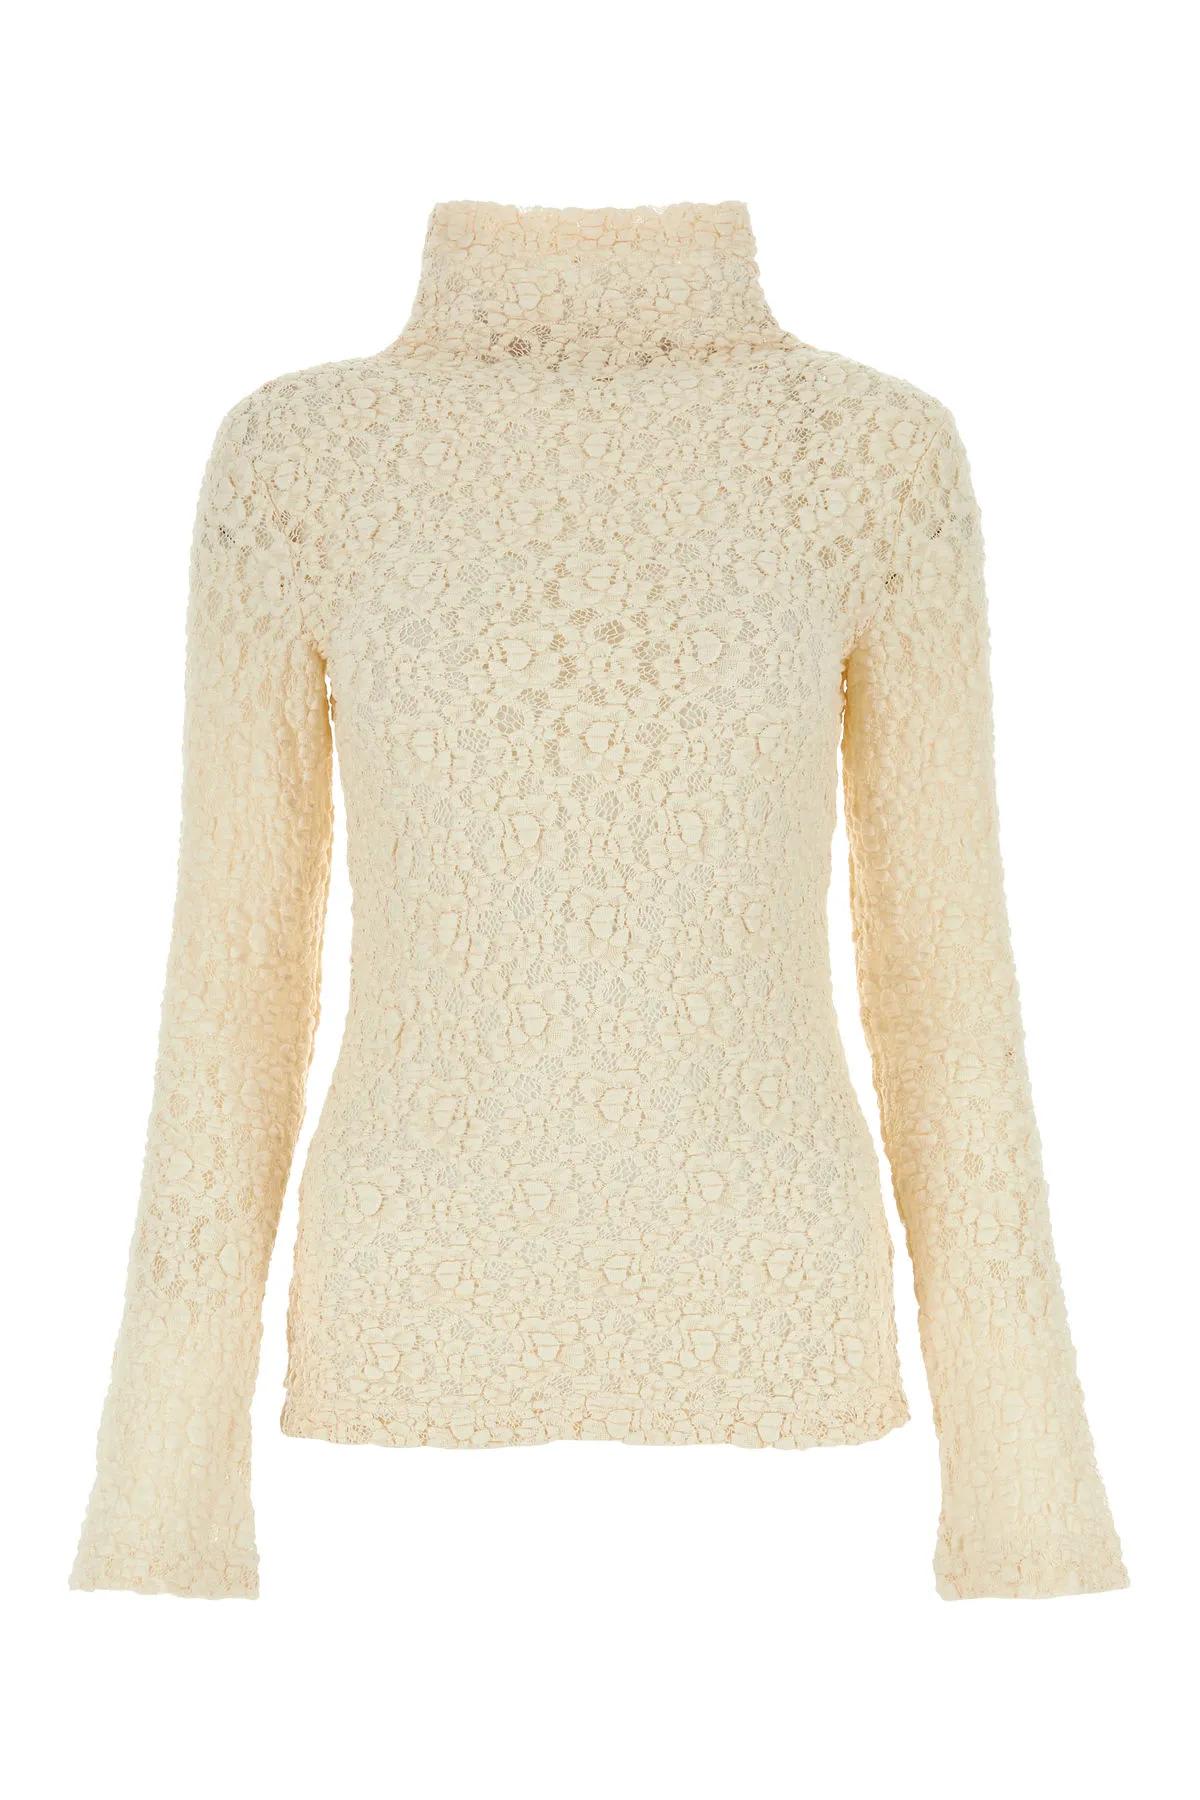 CHLOÉ IVORY LACE TOP WITH FUNNEL NECK